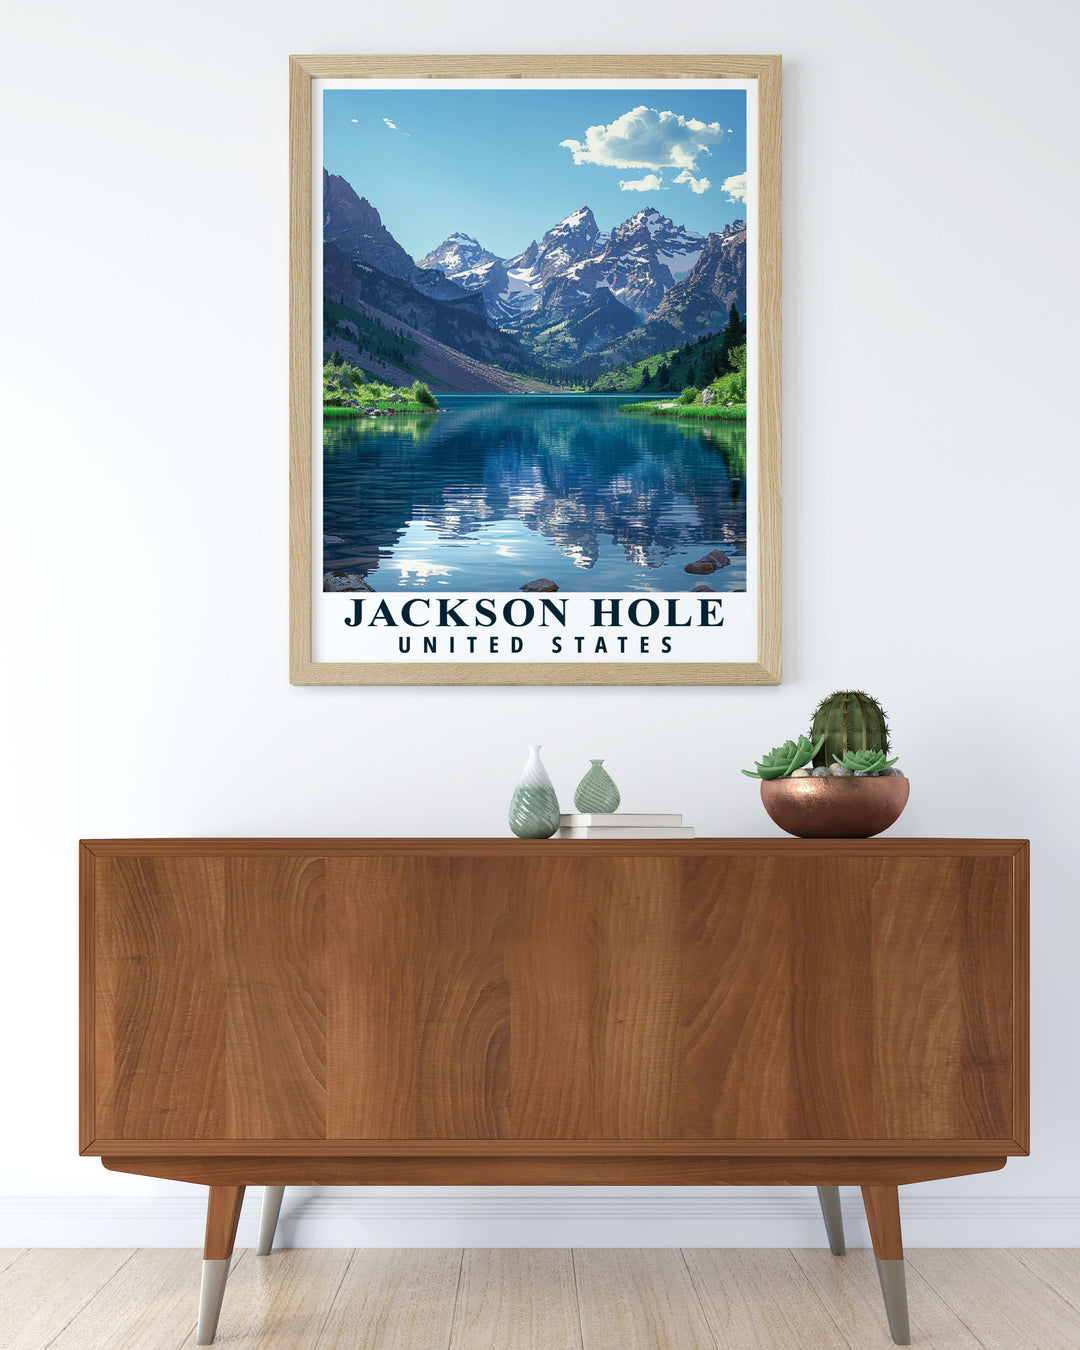 The vibrant colors and detailed illustrations of Jackson Hole and Grand Teton National Park are captured in this poster, celebrating Wyomings scenic charm.